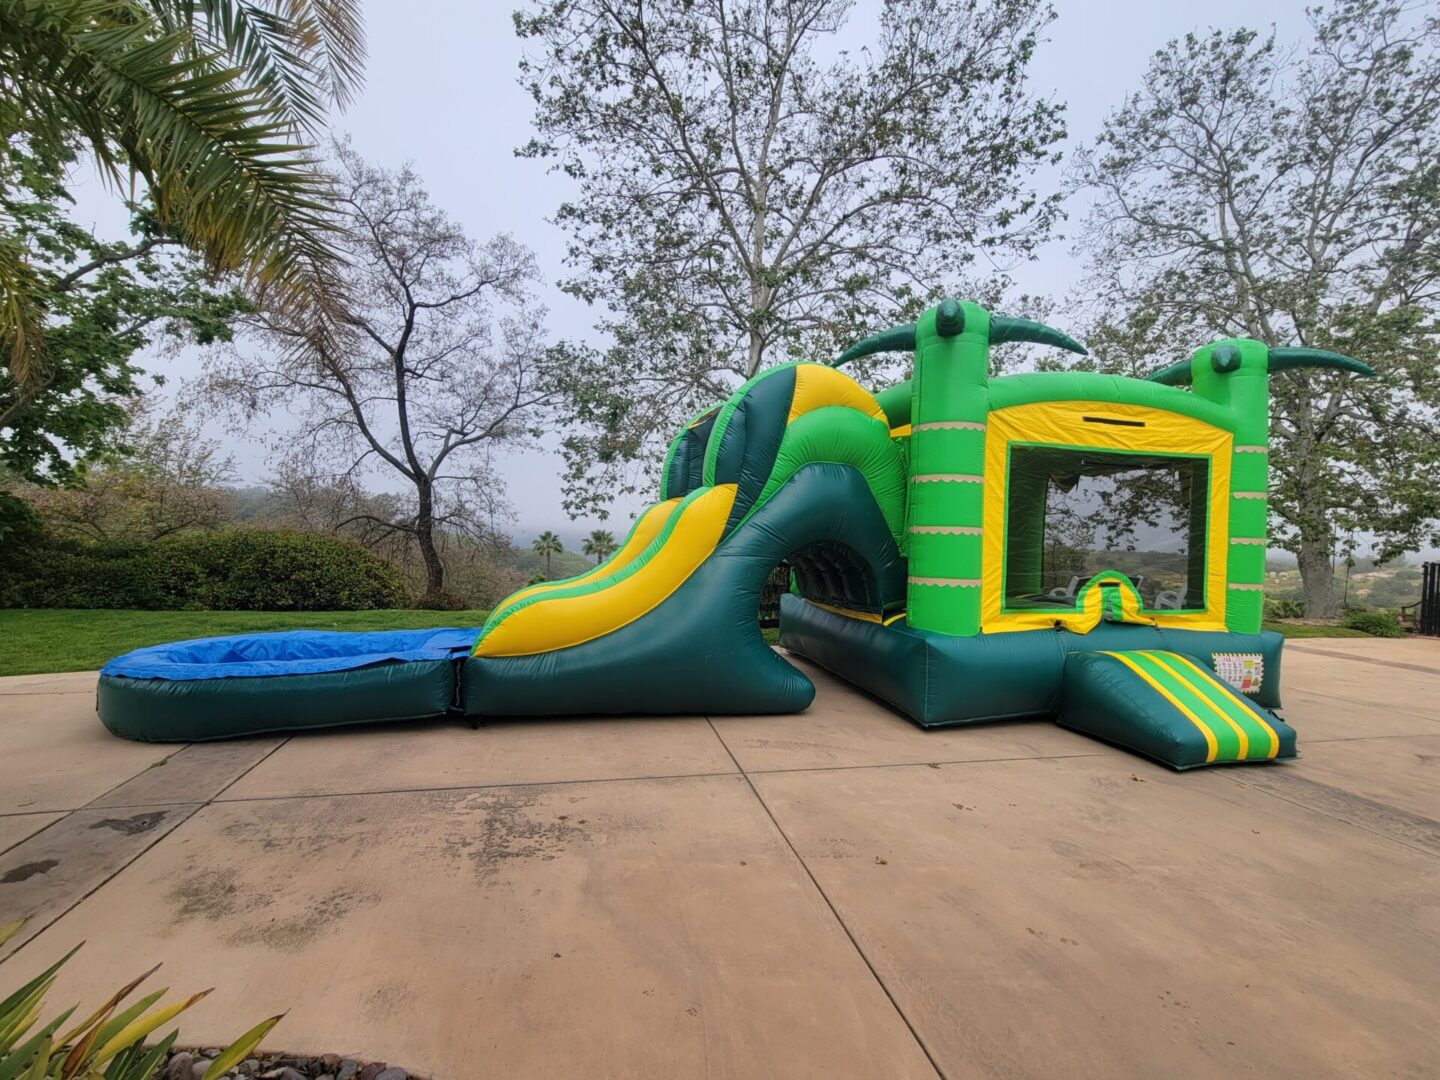 A green and yellow inflatable slide with water.